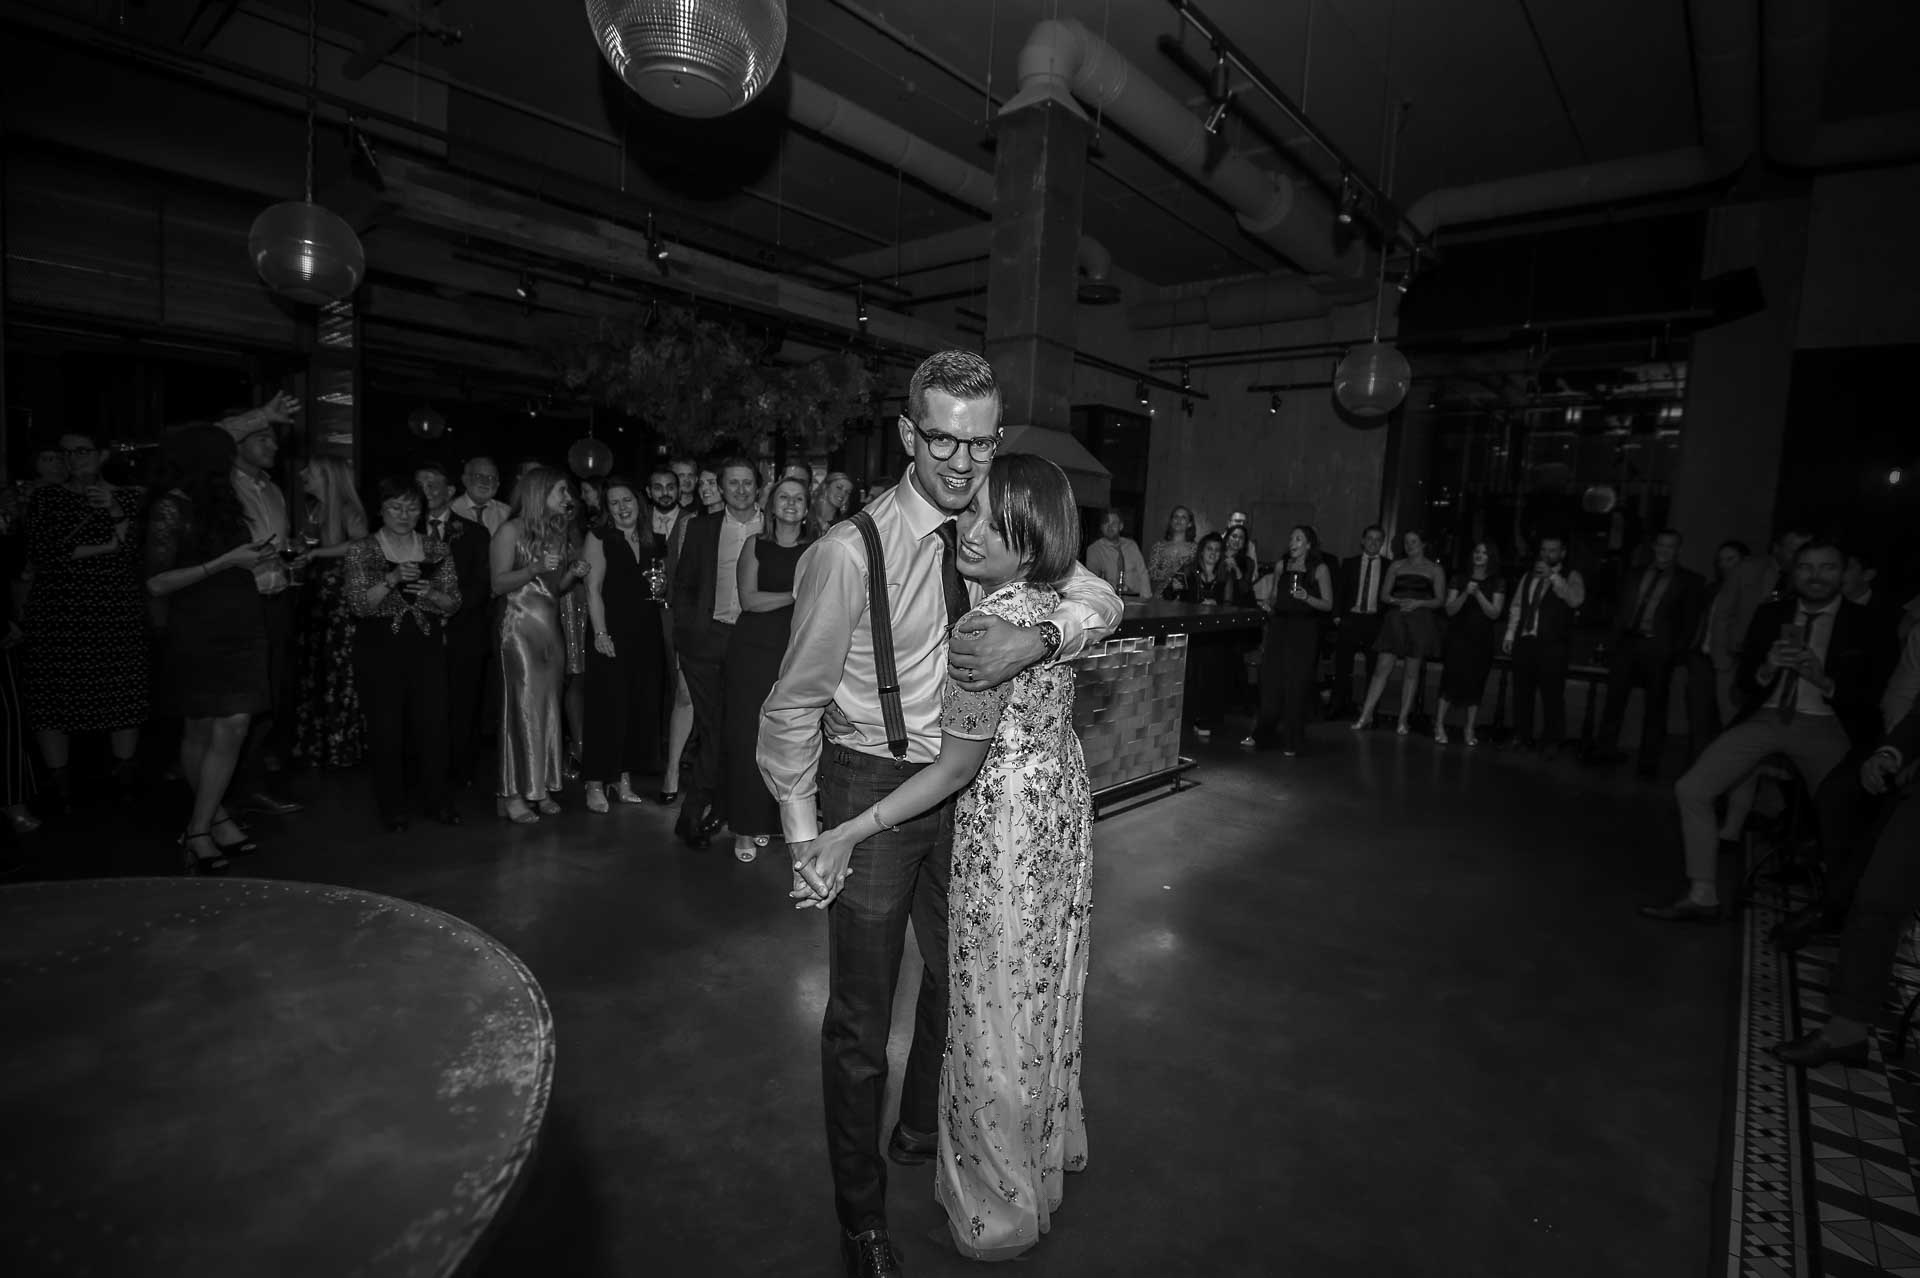 The bride and groom have their first dance at the Kitty Hawk Restaurant in London